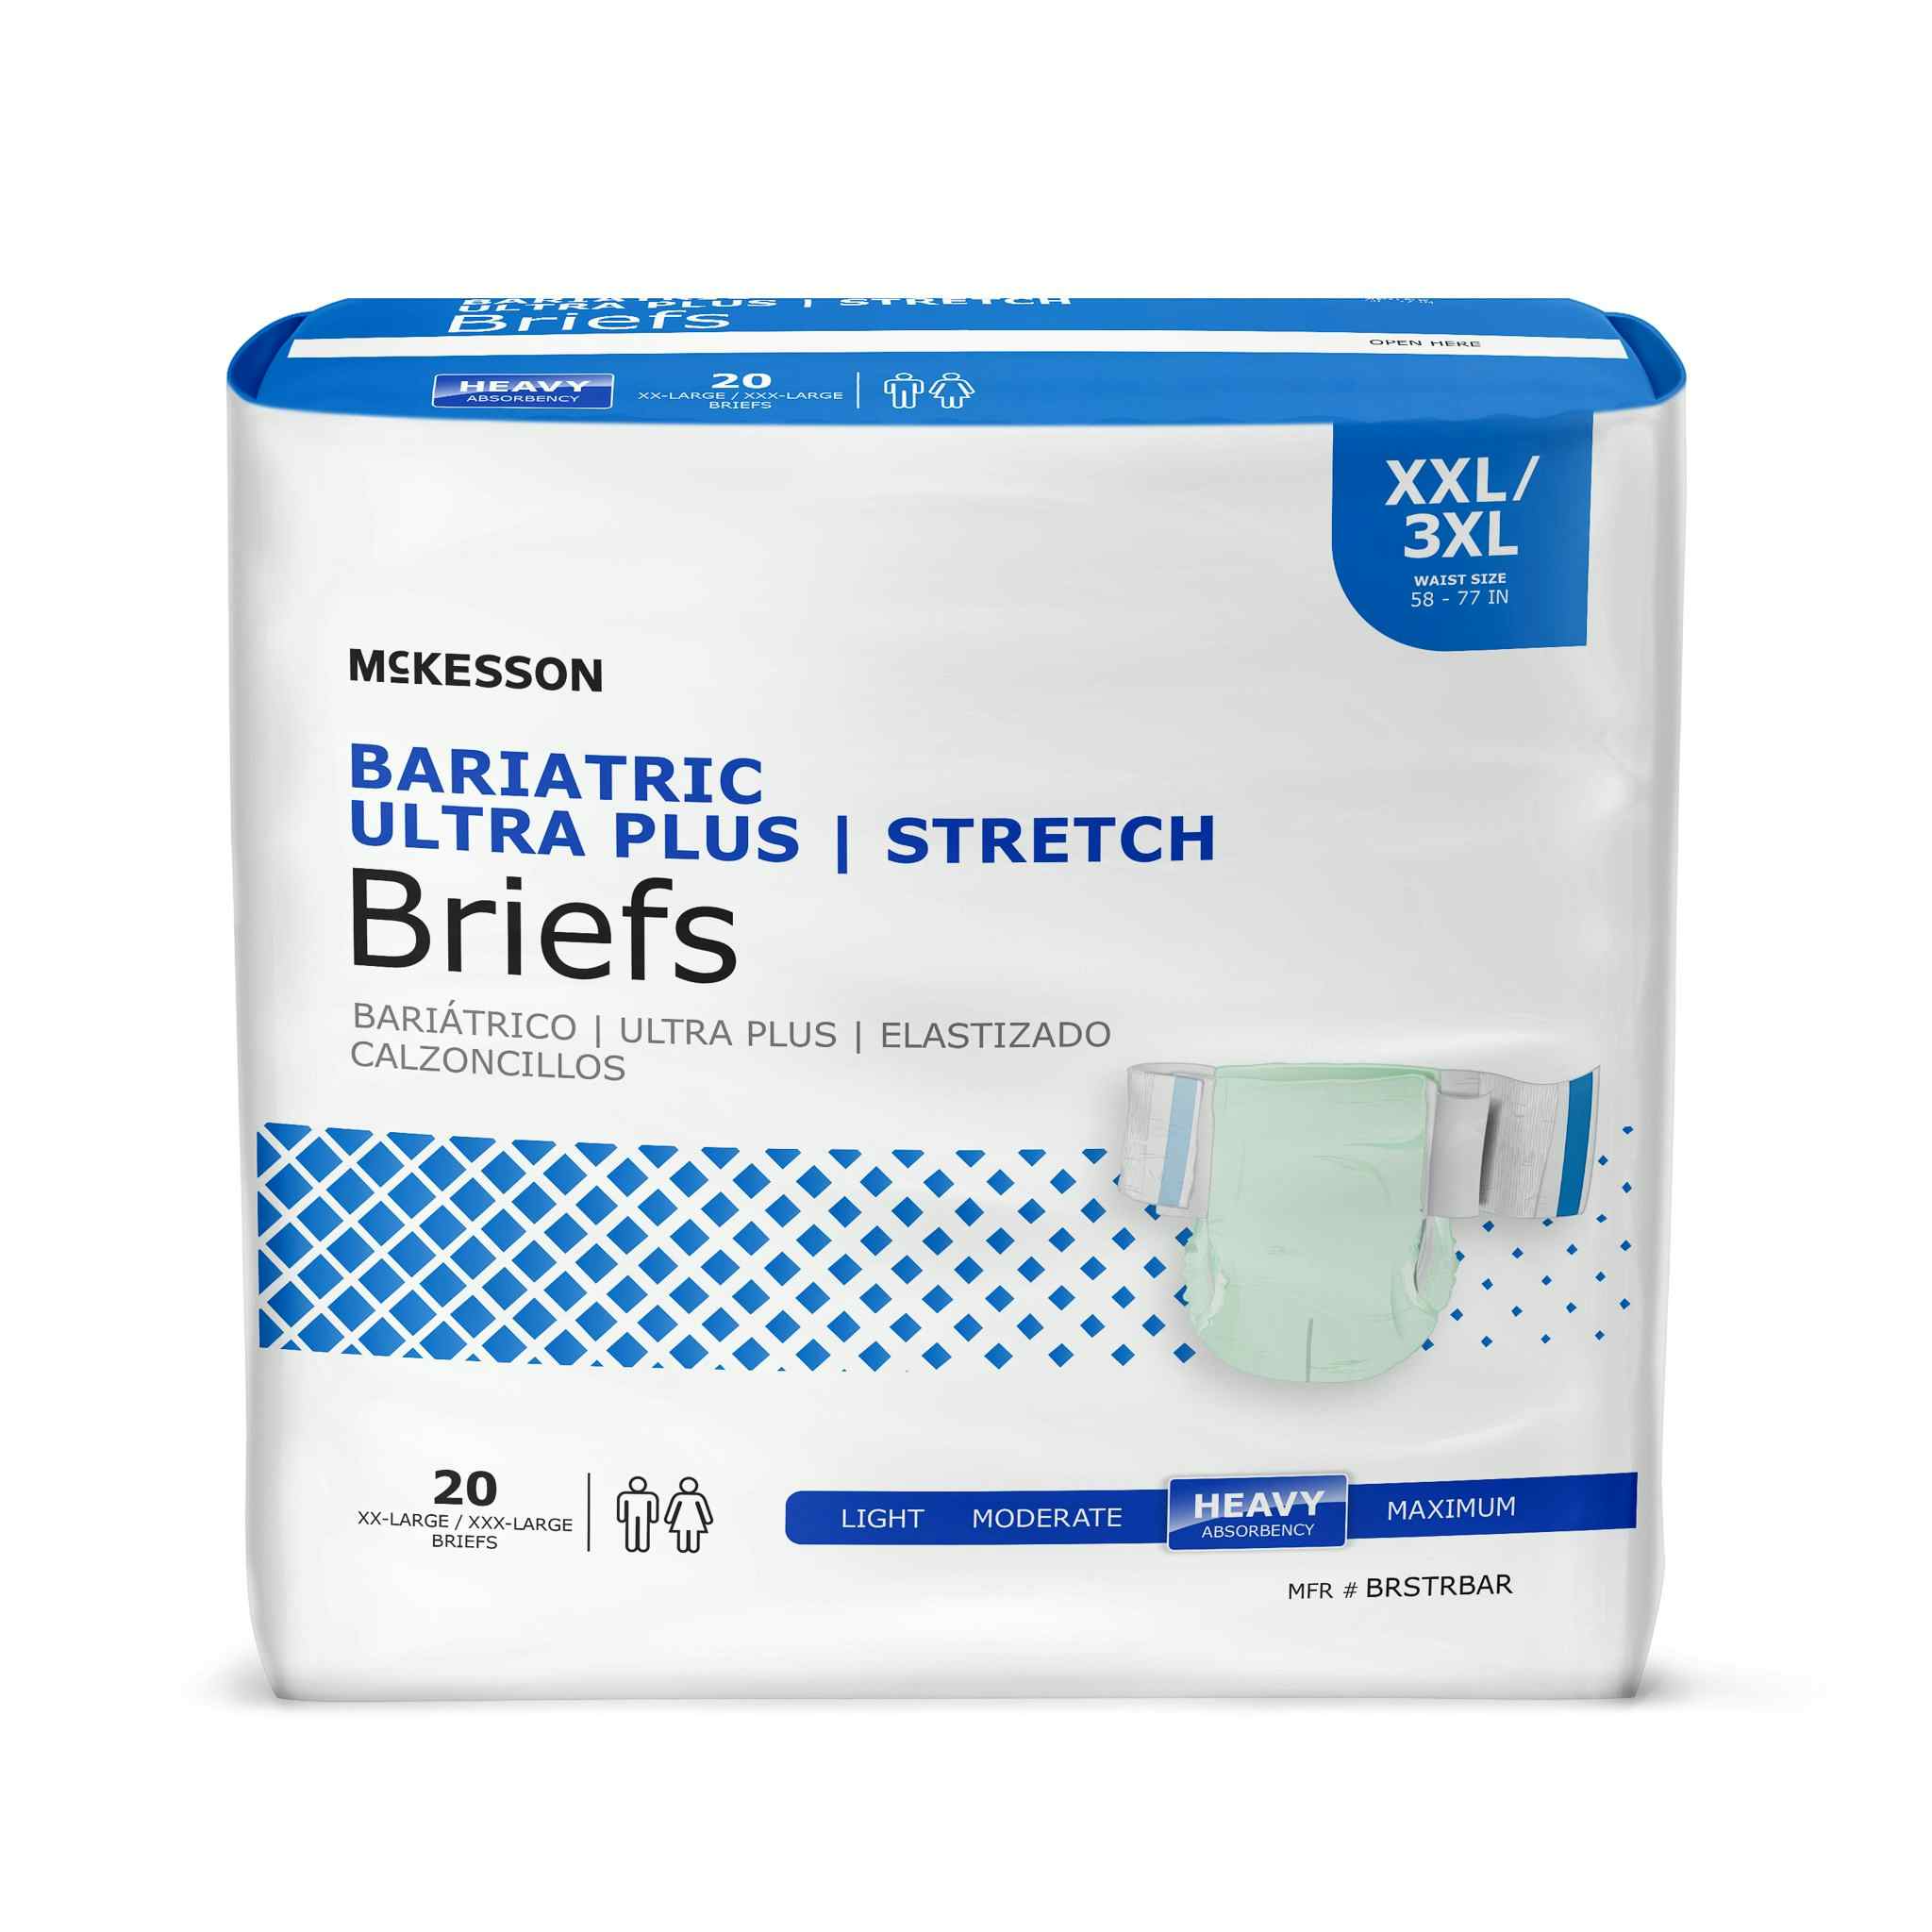 McKesson Bariatric Ultra Plus Stretch Brief Adult Diapers with Tabs, Heavy Absorbency, BRSTRBAR, Light Green - 2XL/3XL (58-77") - Case of 80 (4 Bags)